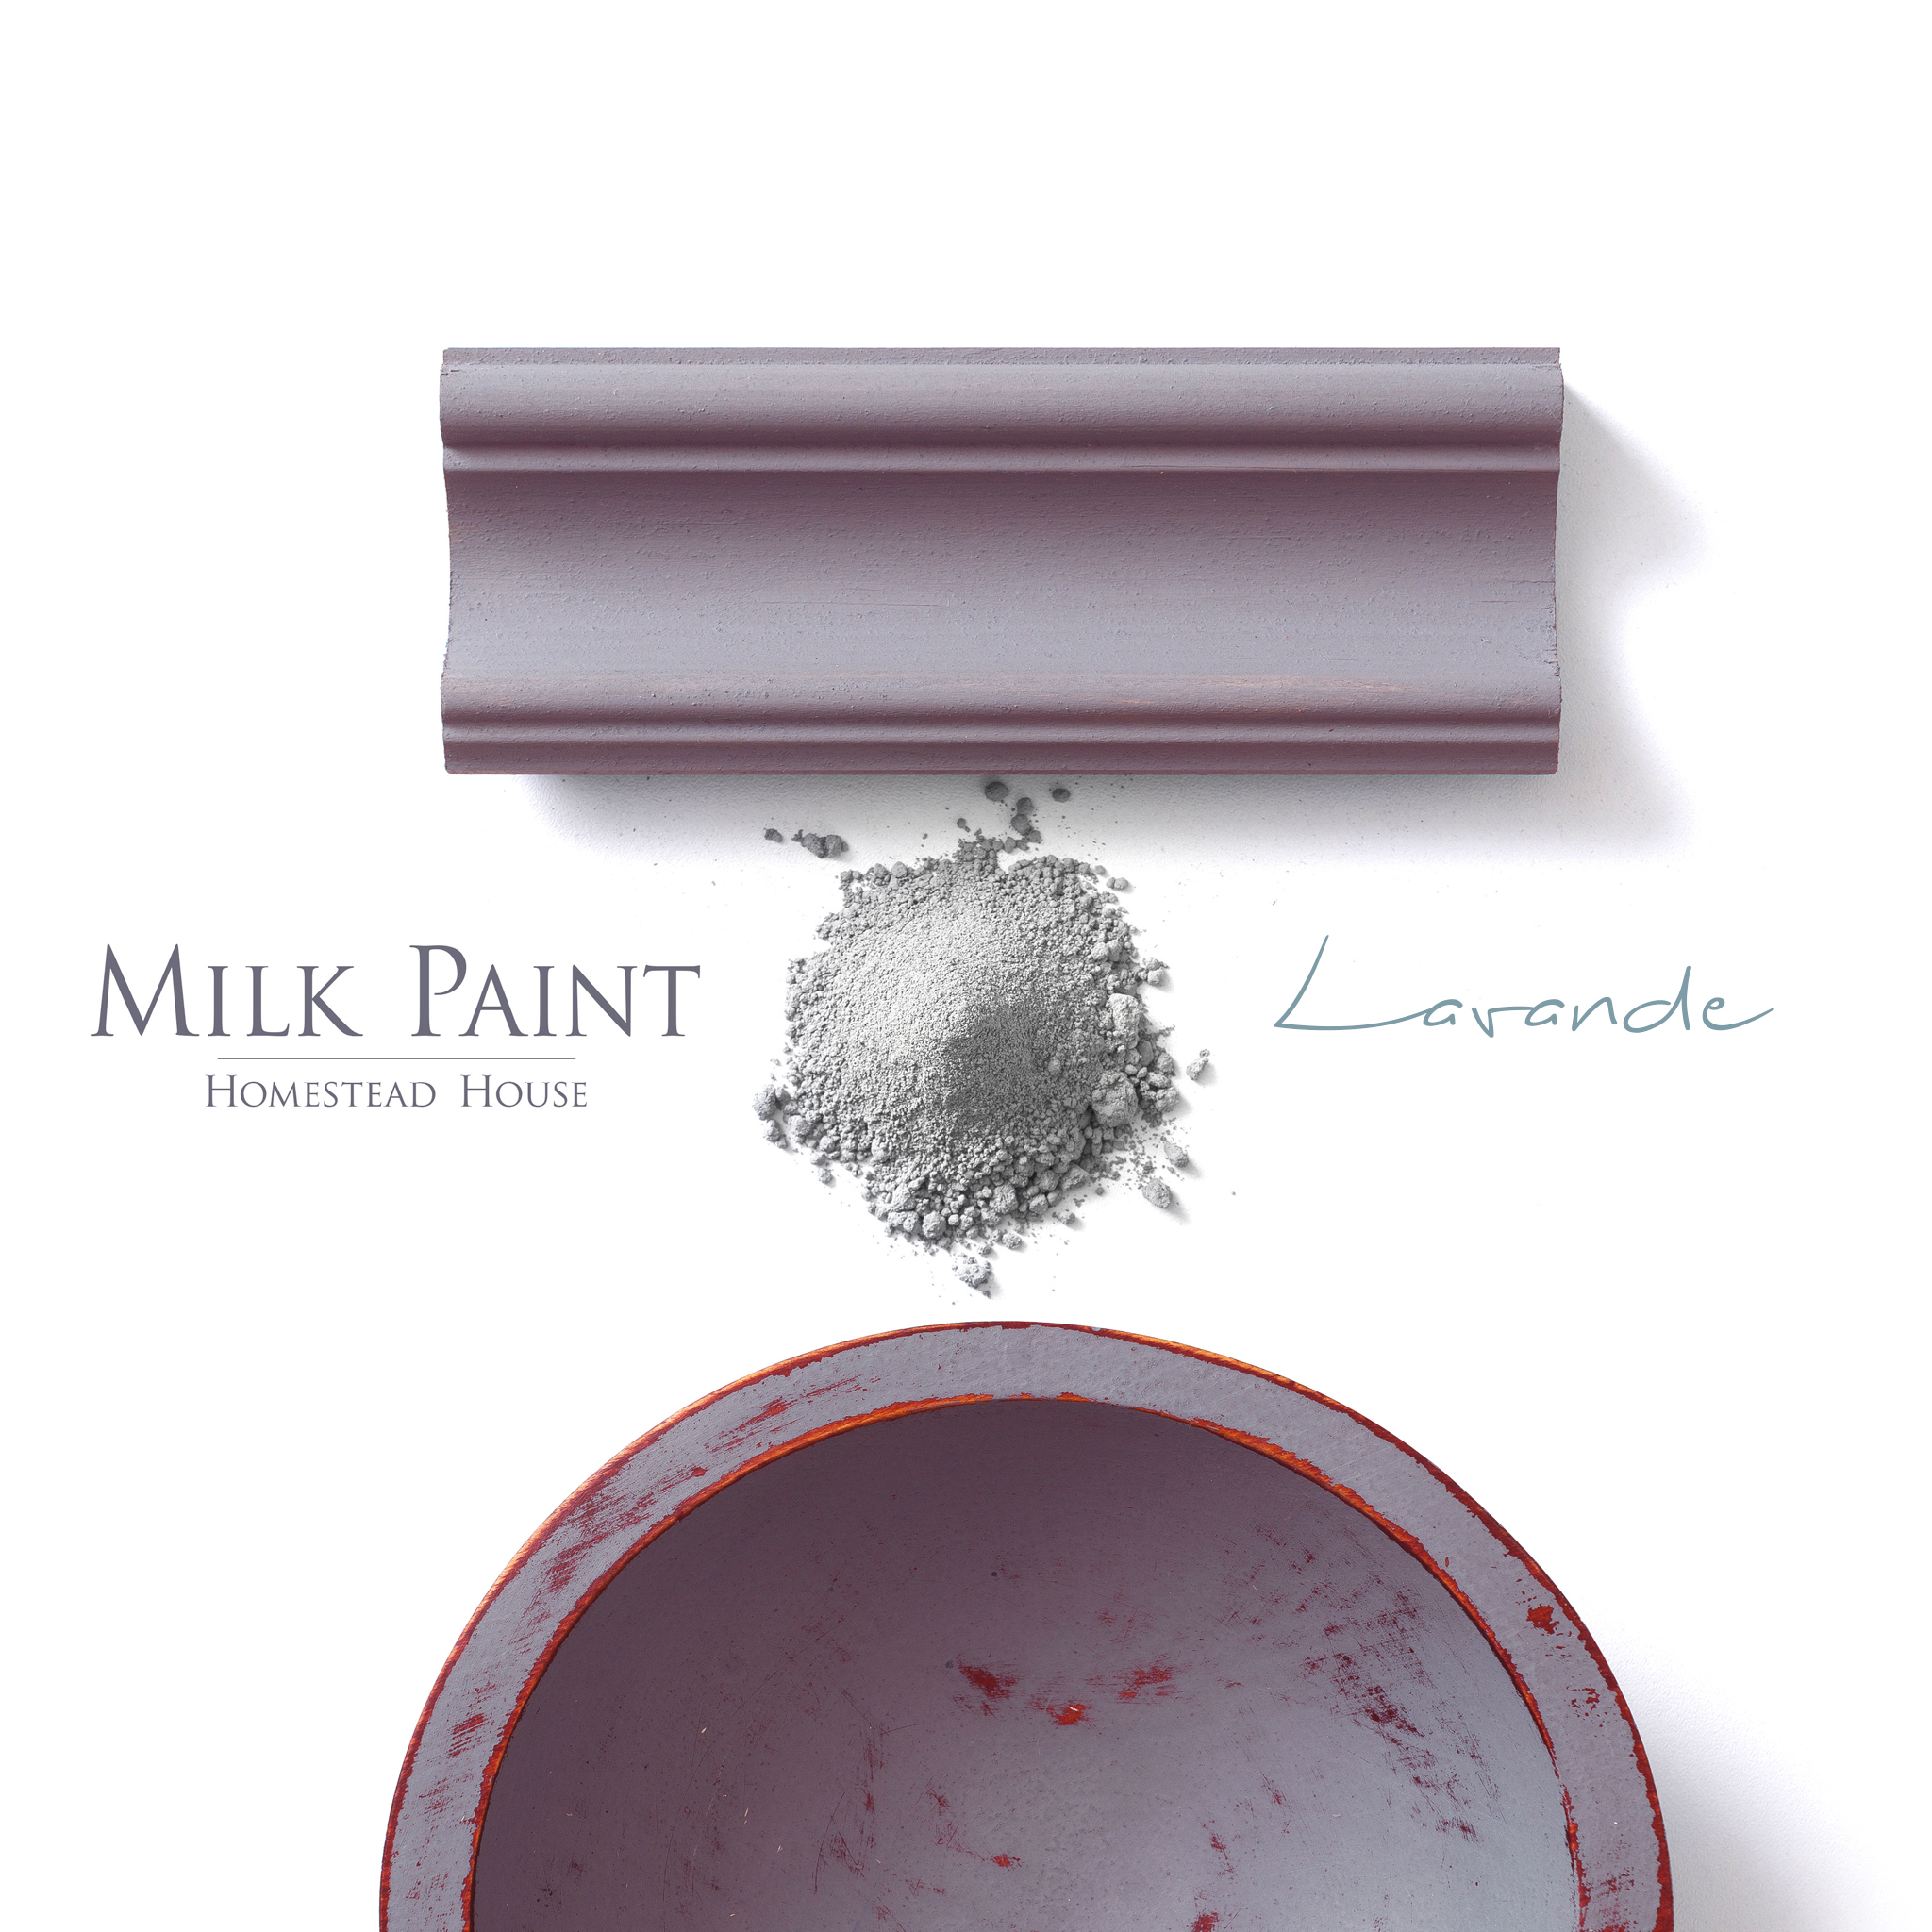 milk paint powder and bowl painted in the colour lavende